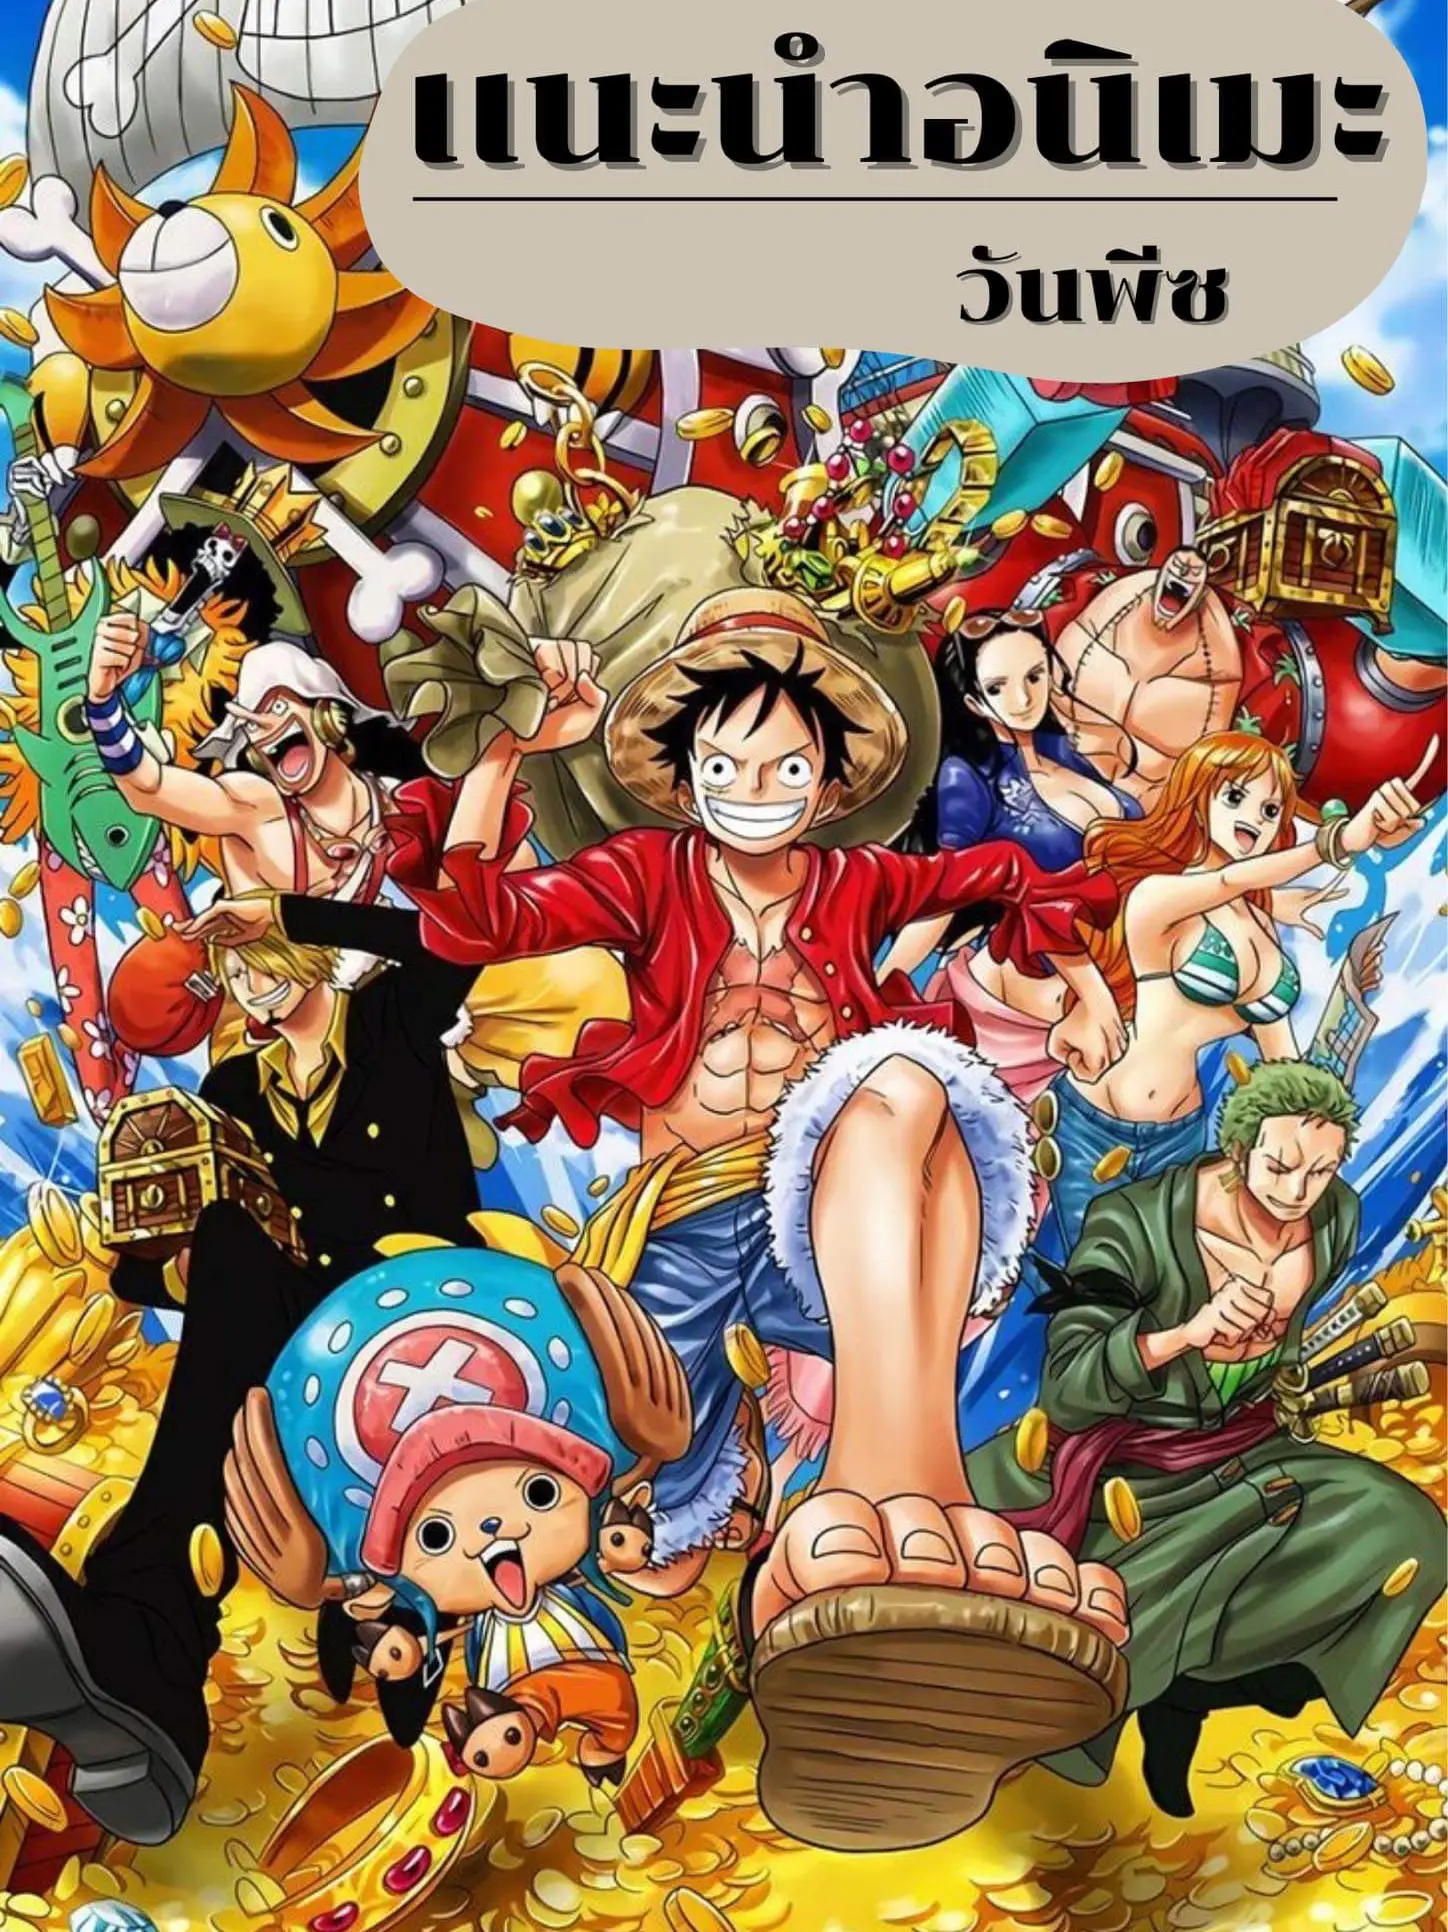 Anime One Piece The Straw Hat Pirates Facebook Cover Photo